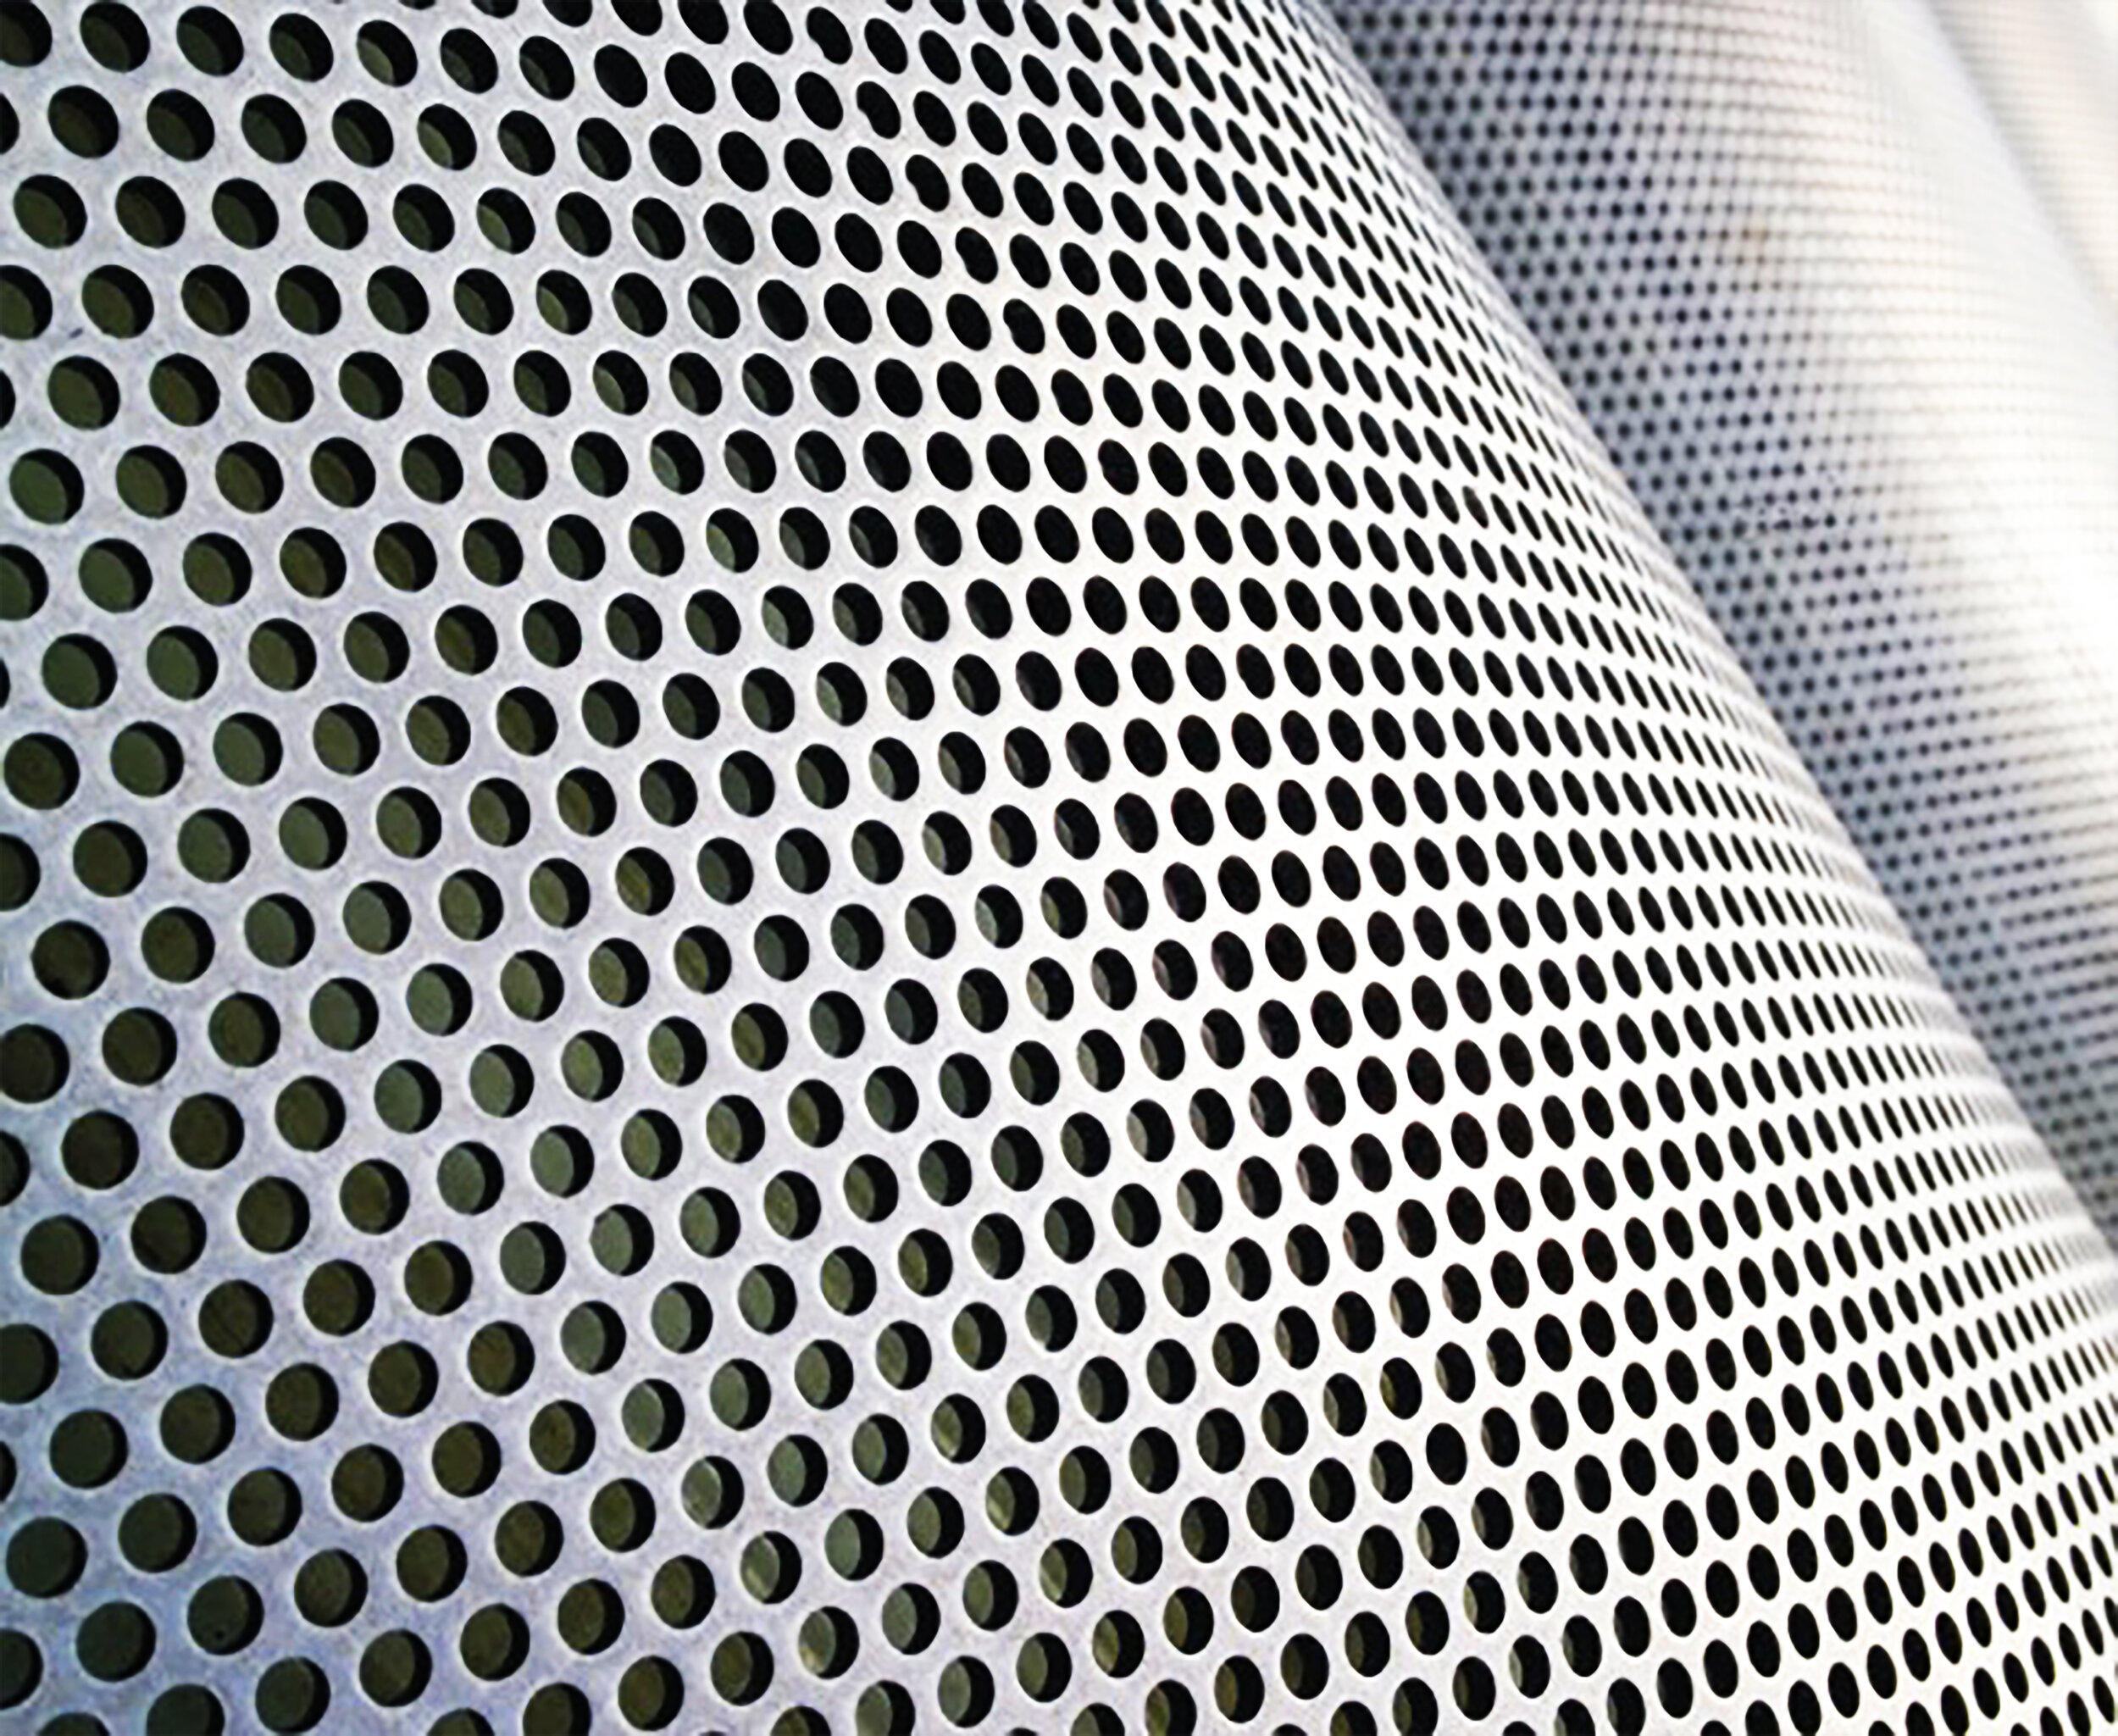 Perforated Steel